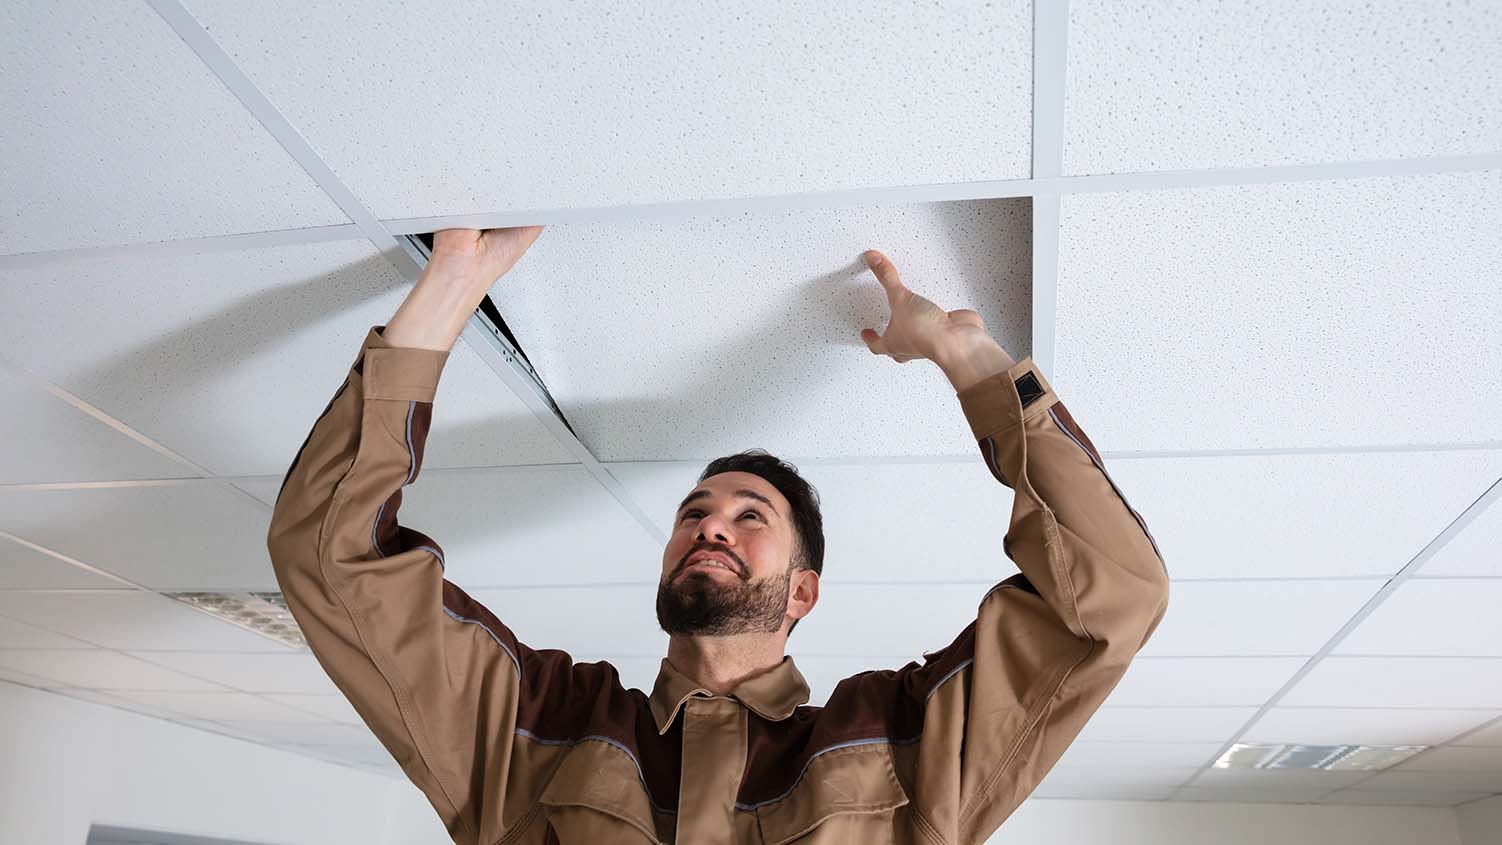 How To Install Ceiling Tiles